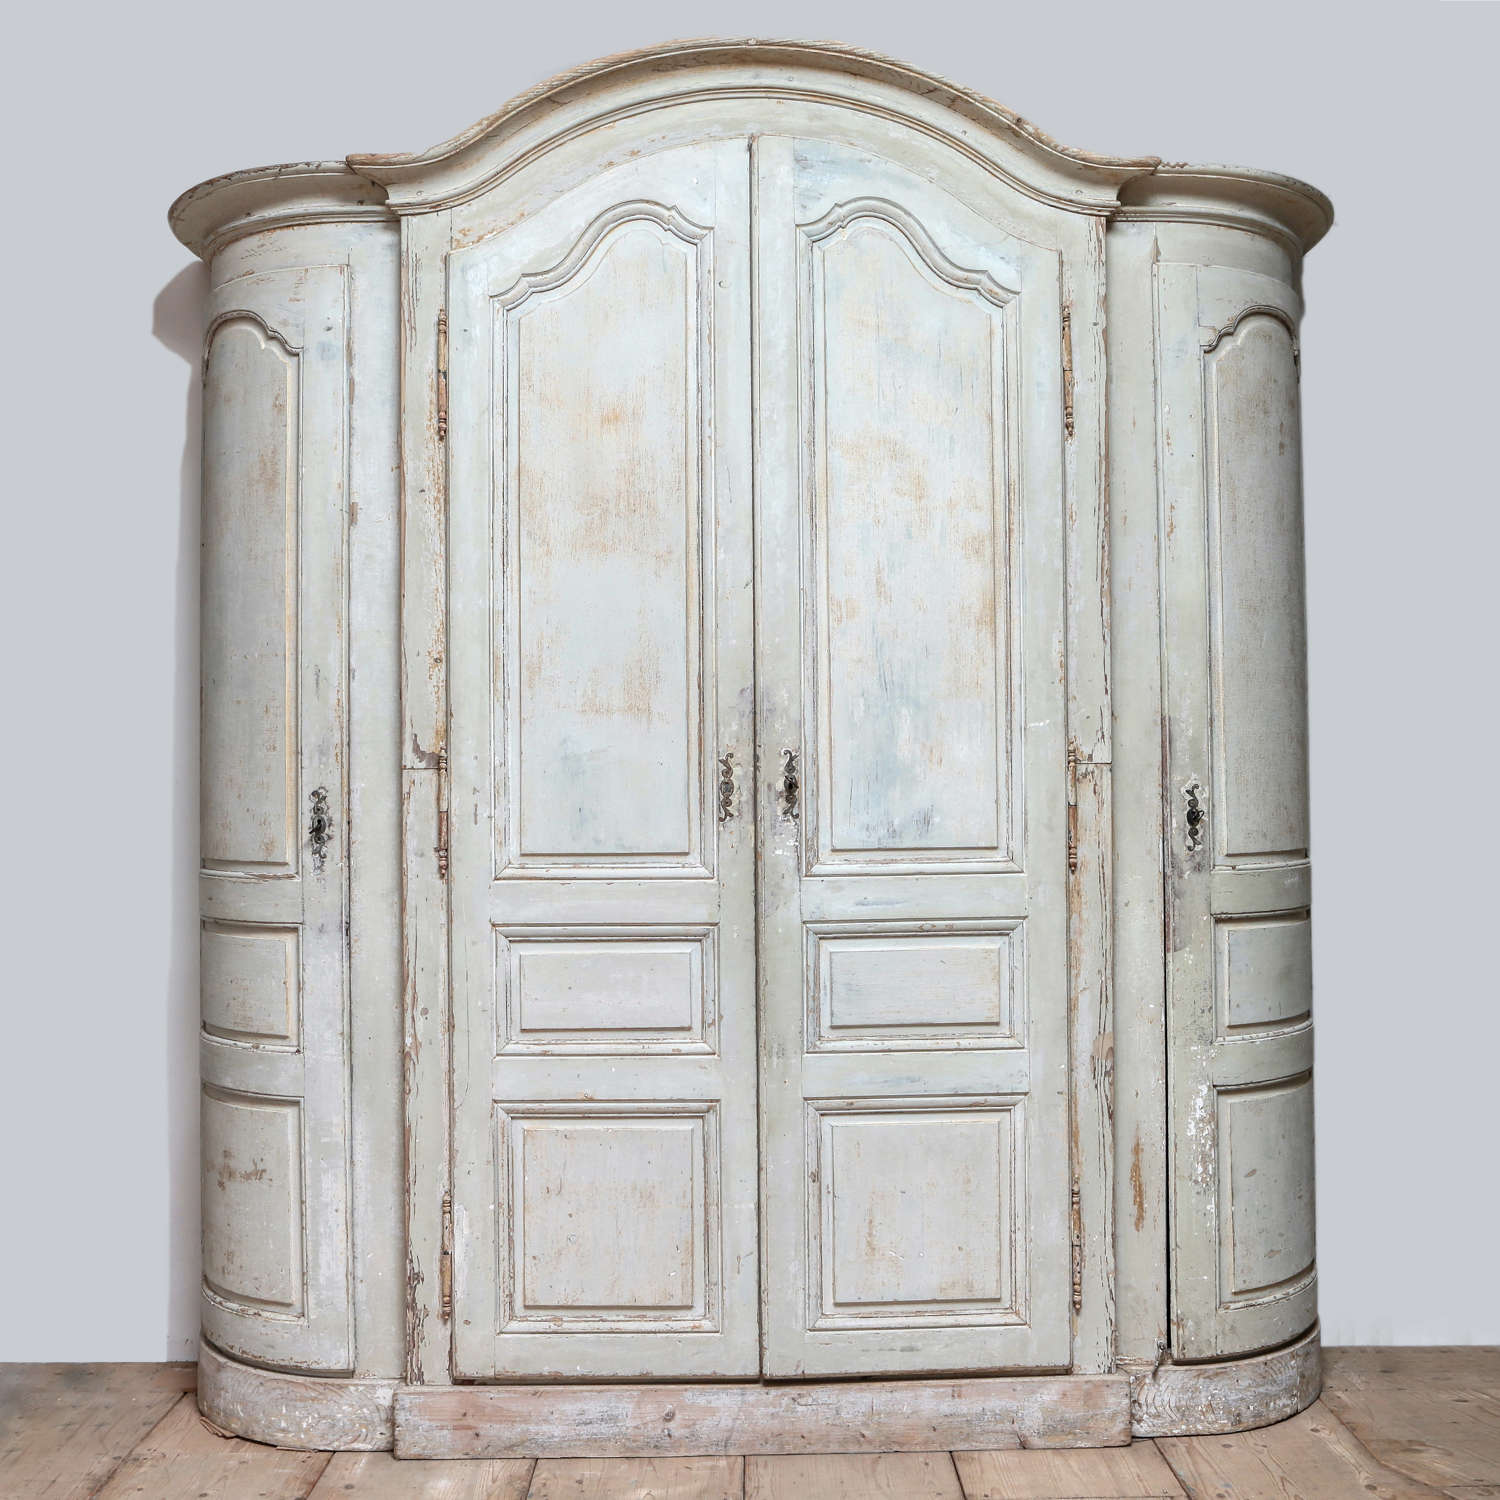 French 18th century barrel ended armoire